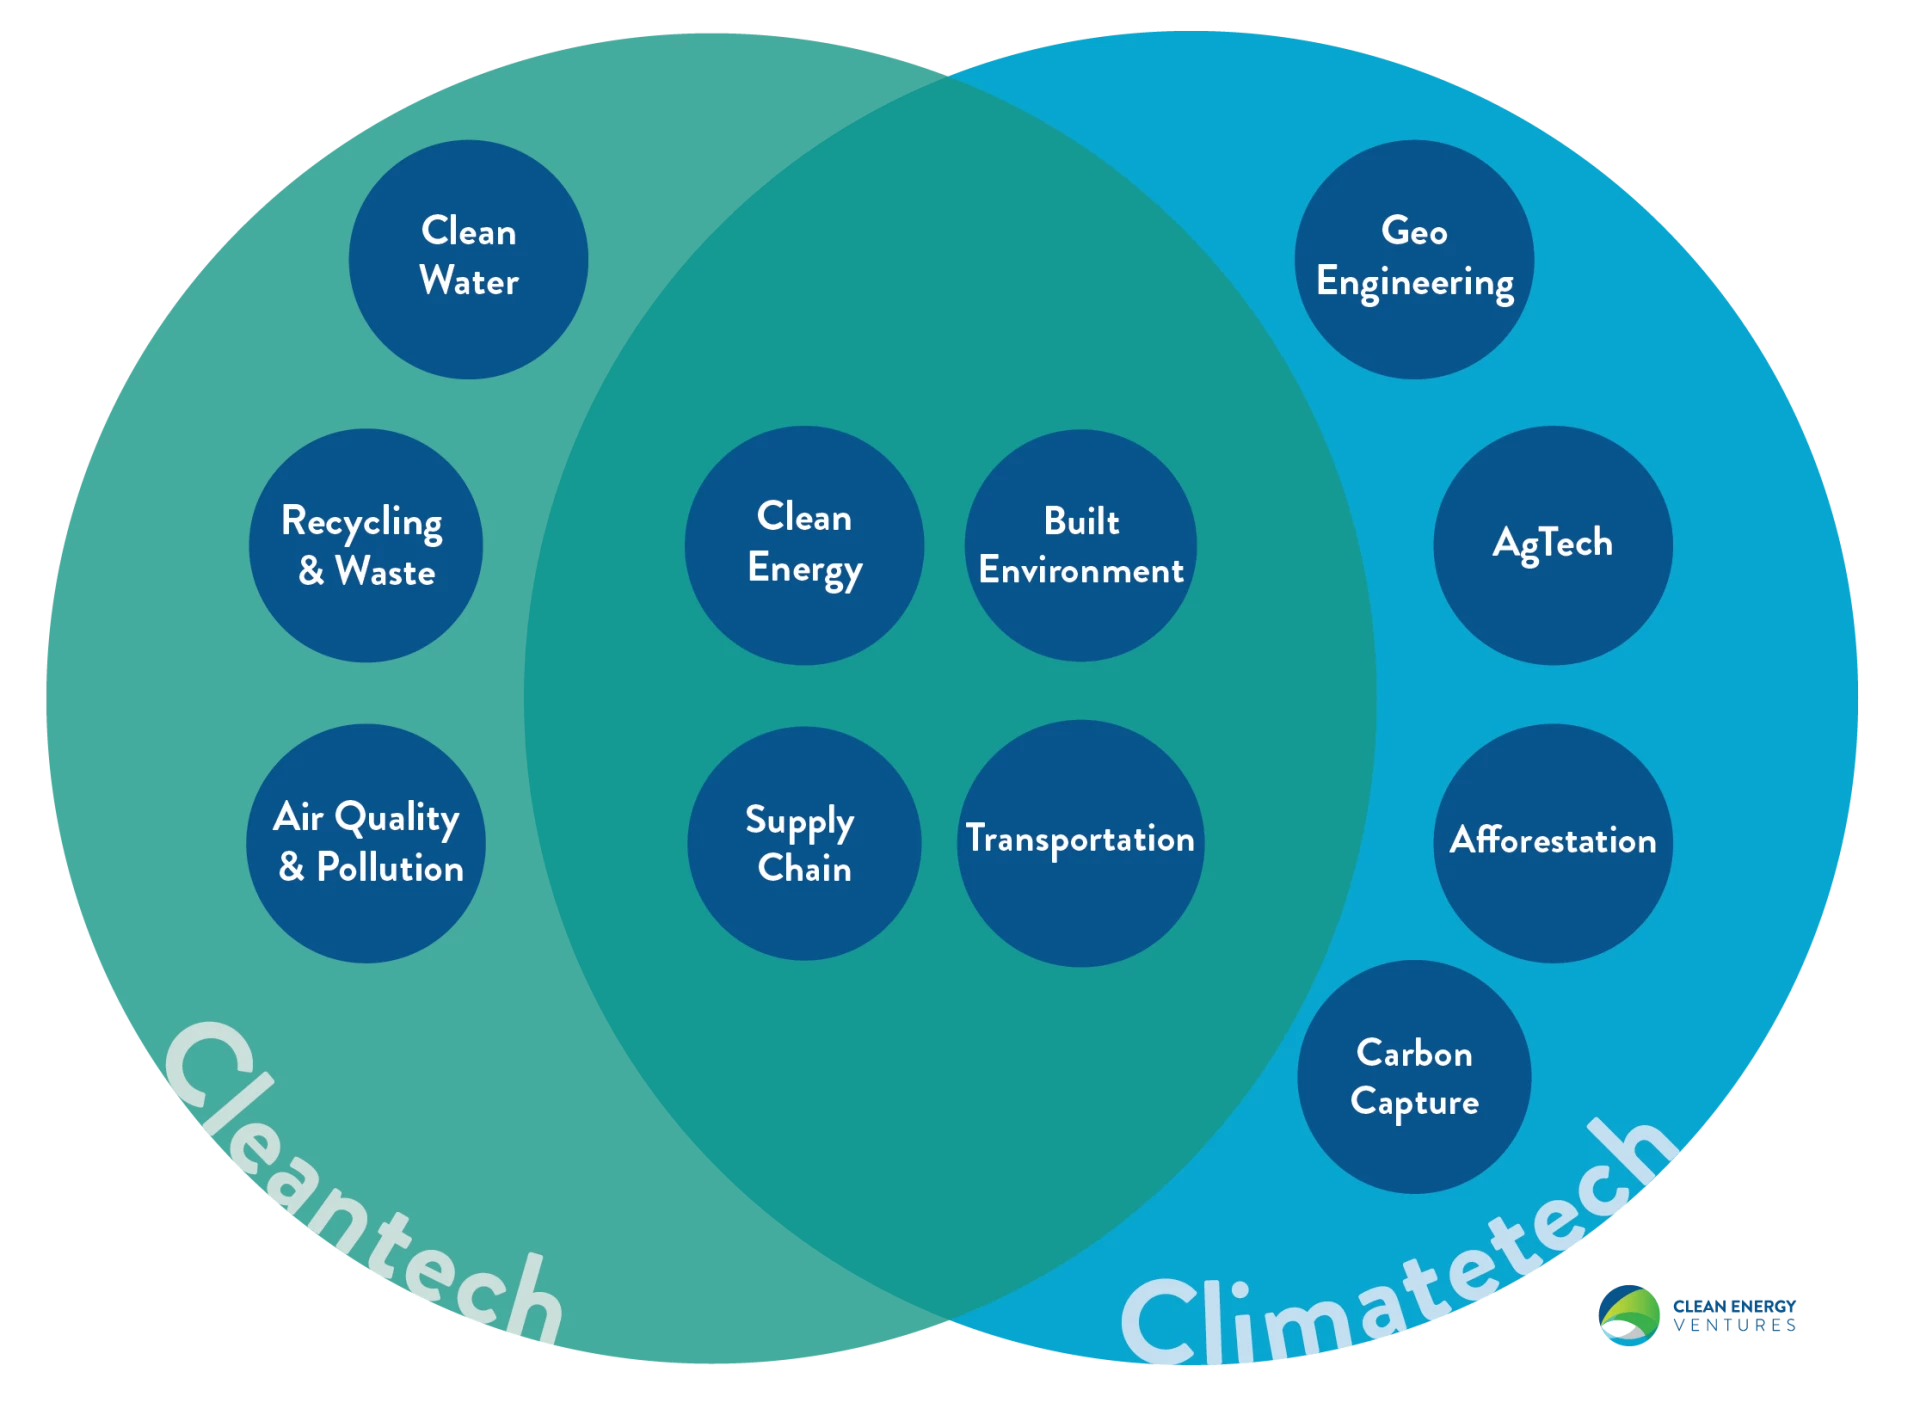 What is the difference between climatetech and cleantech?